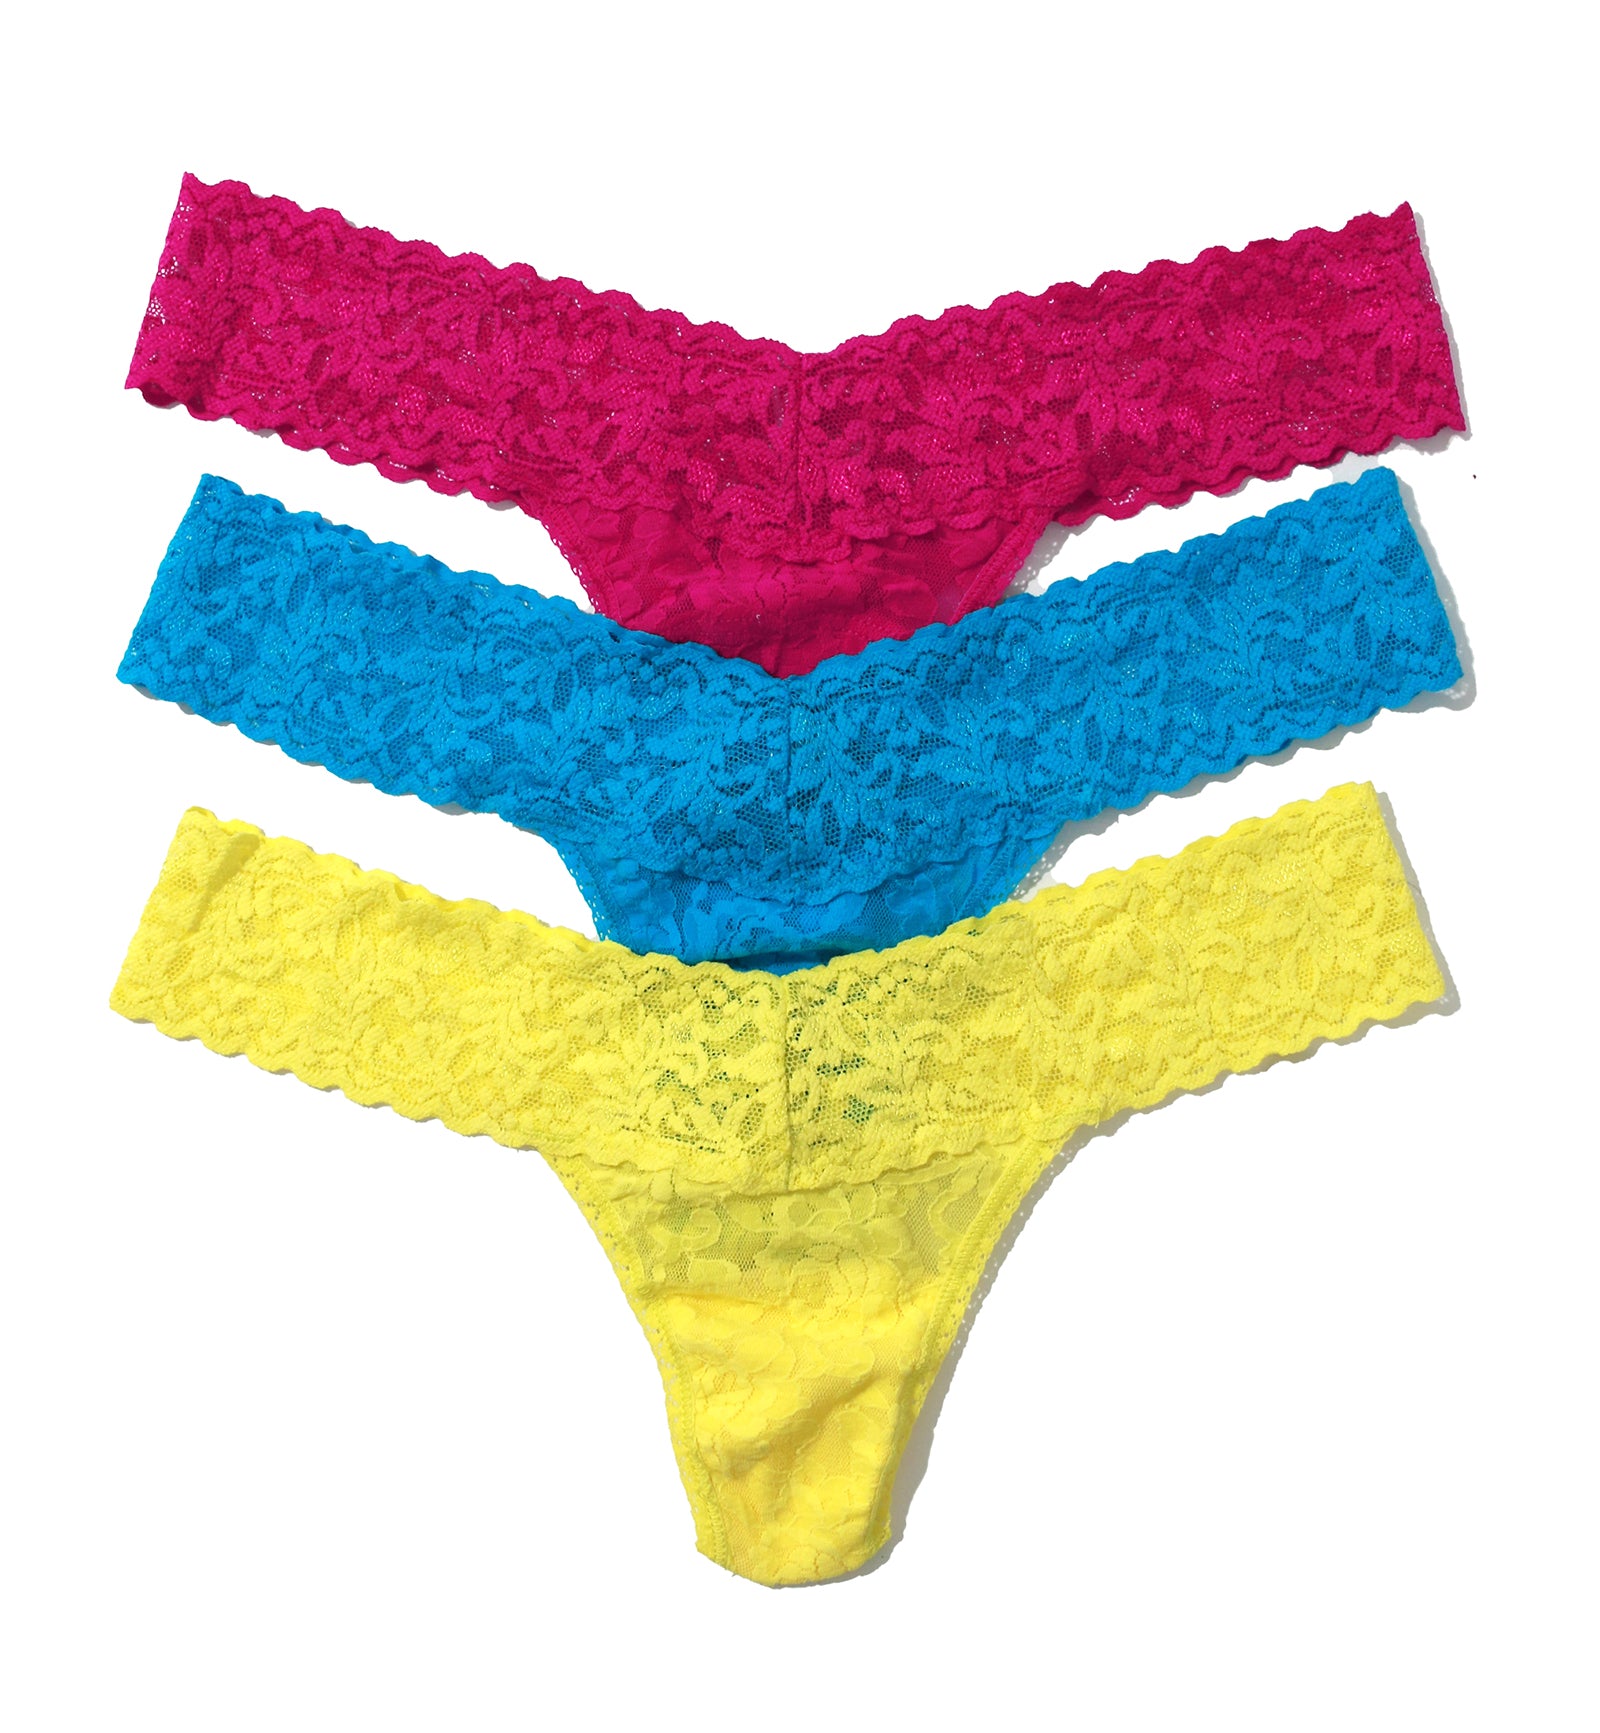 Hanky Panky 3-PACK Signature Lace Low Rise Thong (49113PK),Still Blooming - Venetian Pink/Fiji Blue/Citrus Punch,One Size